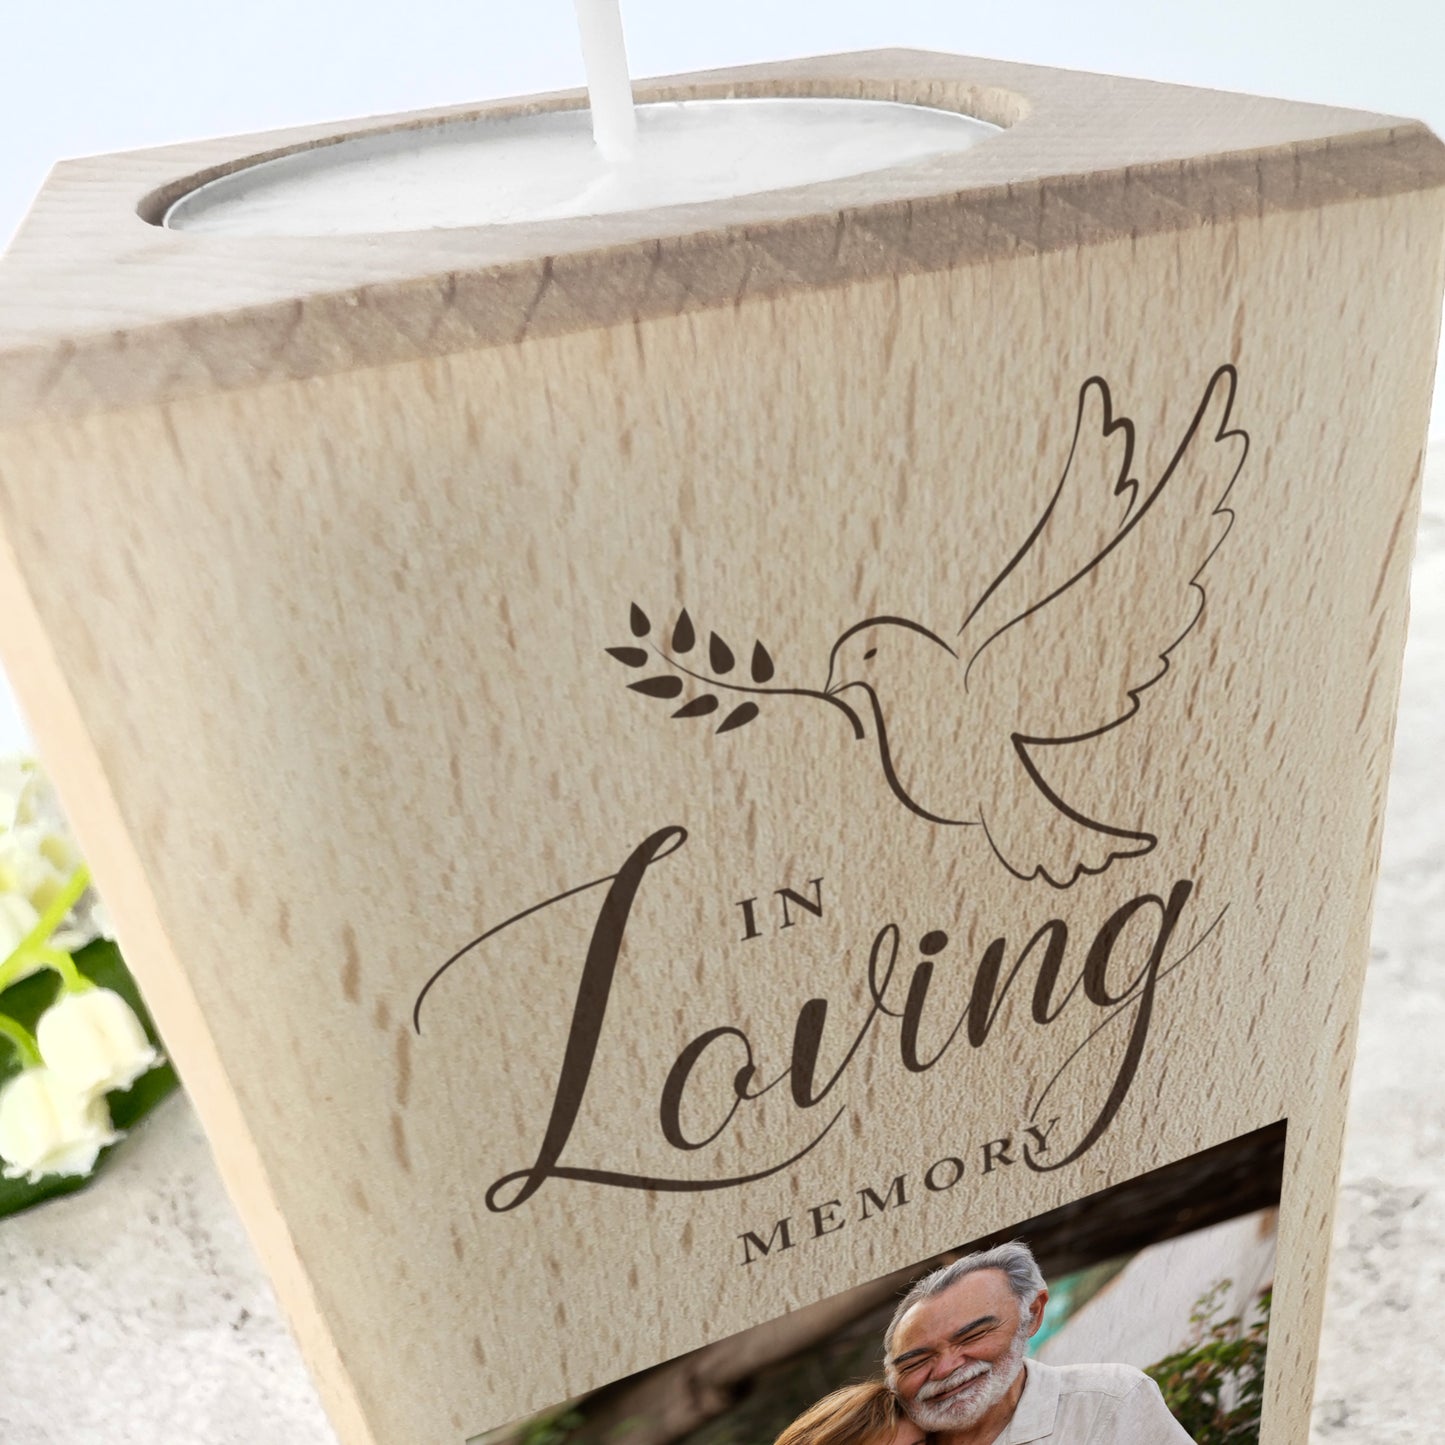 Personalised Memorial Dove Solid Wood Photo Tea Light Holder - 2 Sizes